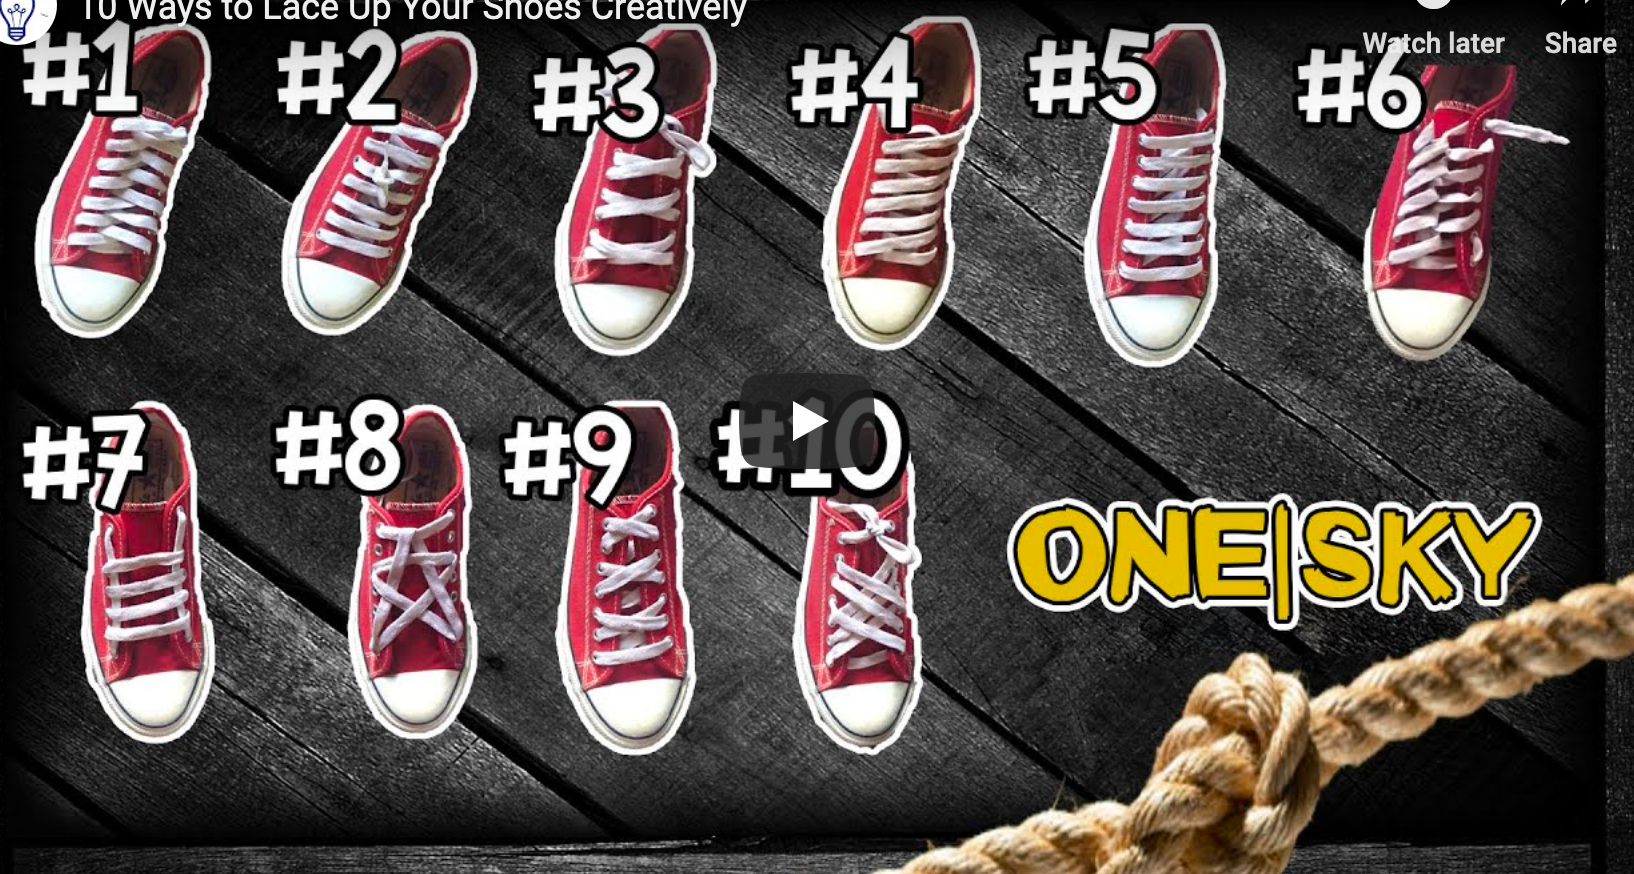 how to lace up chucks